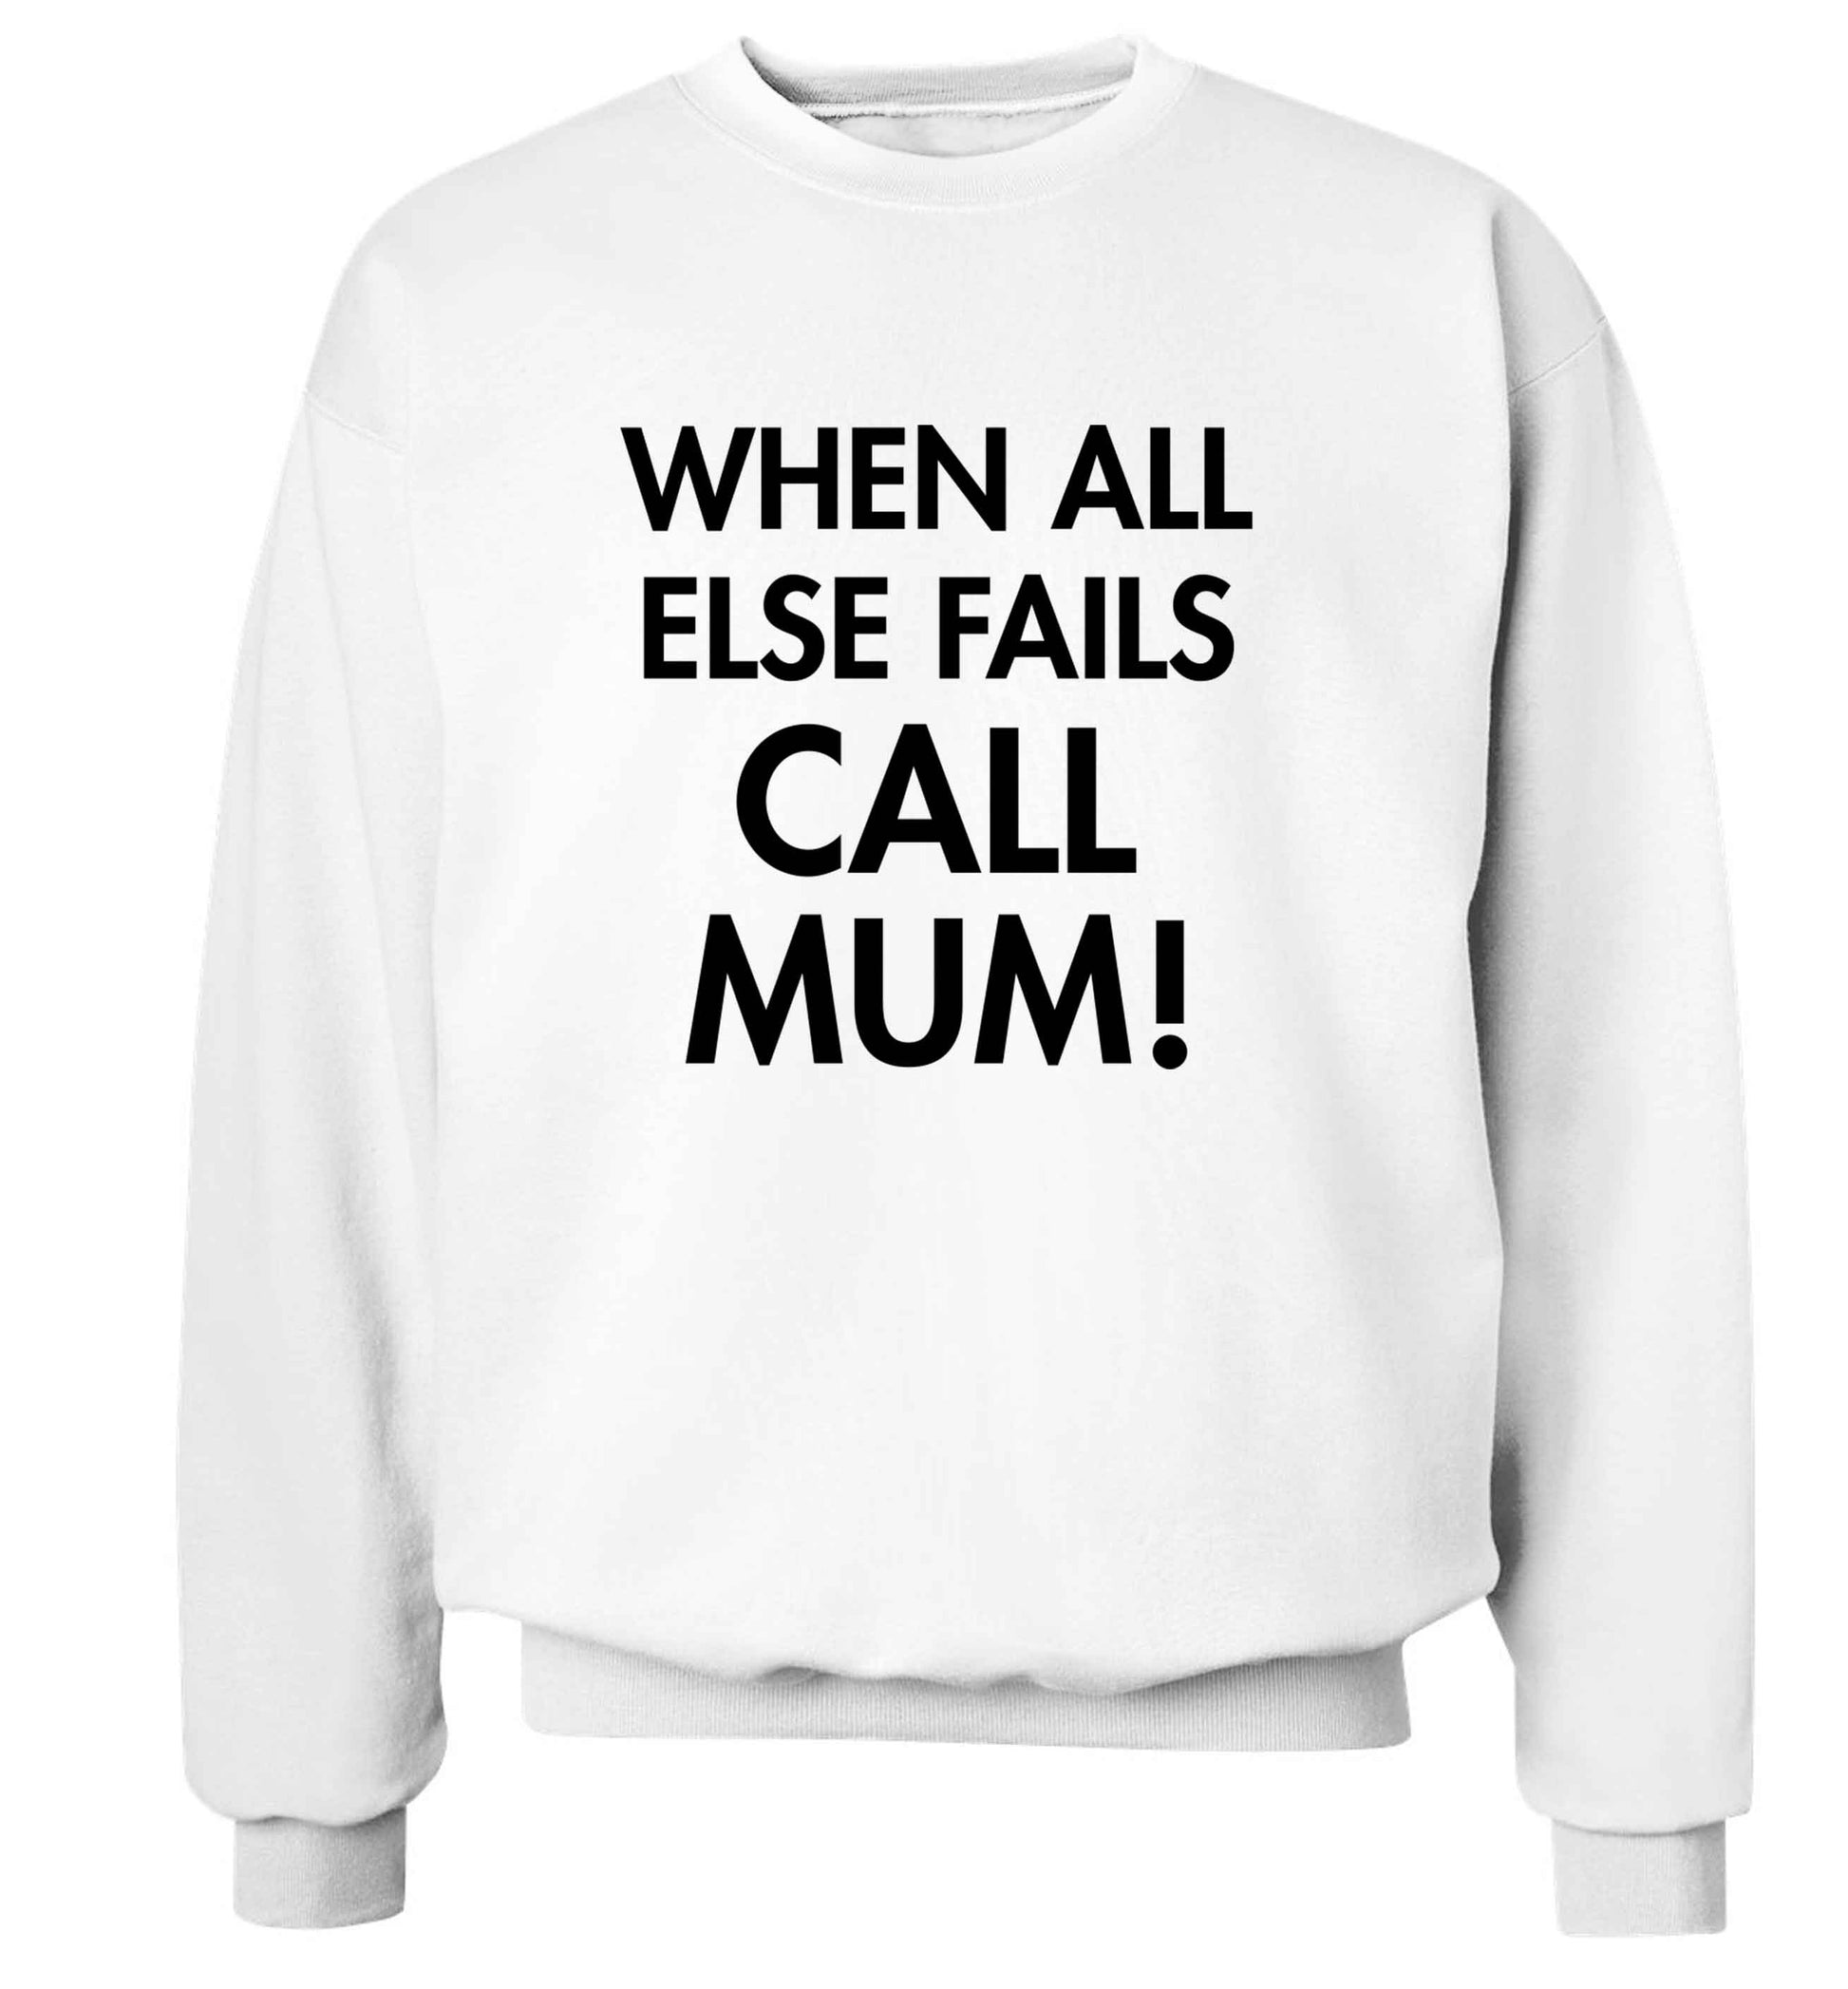 When all else fails call mum! adult's unisex white sweater 2XL